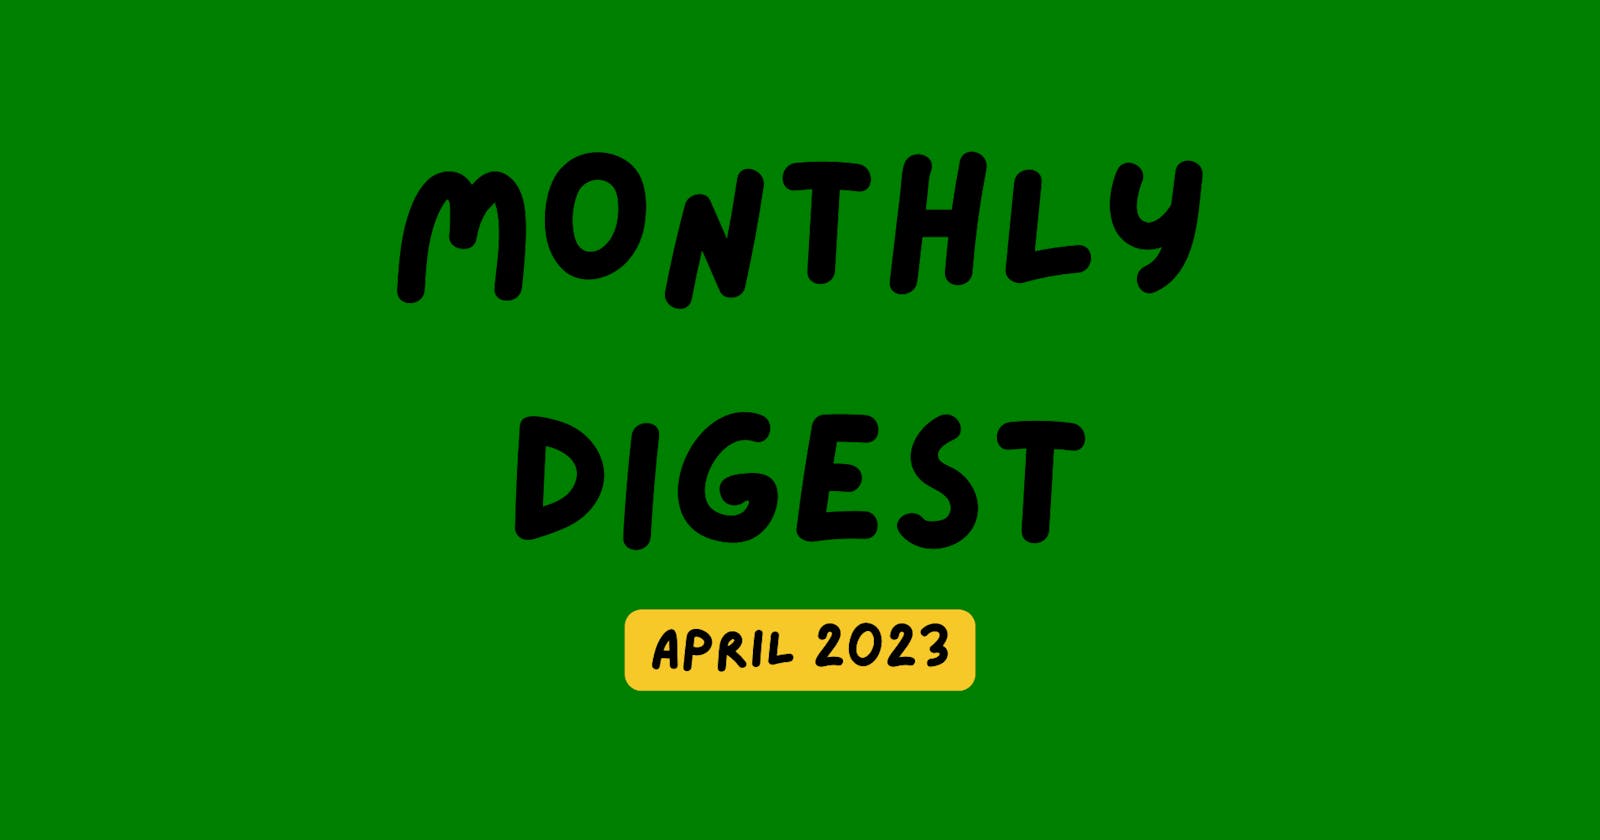 📰 Monthly digests: April 2023